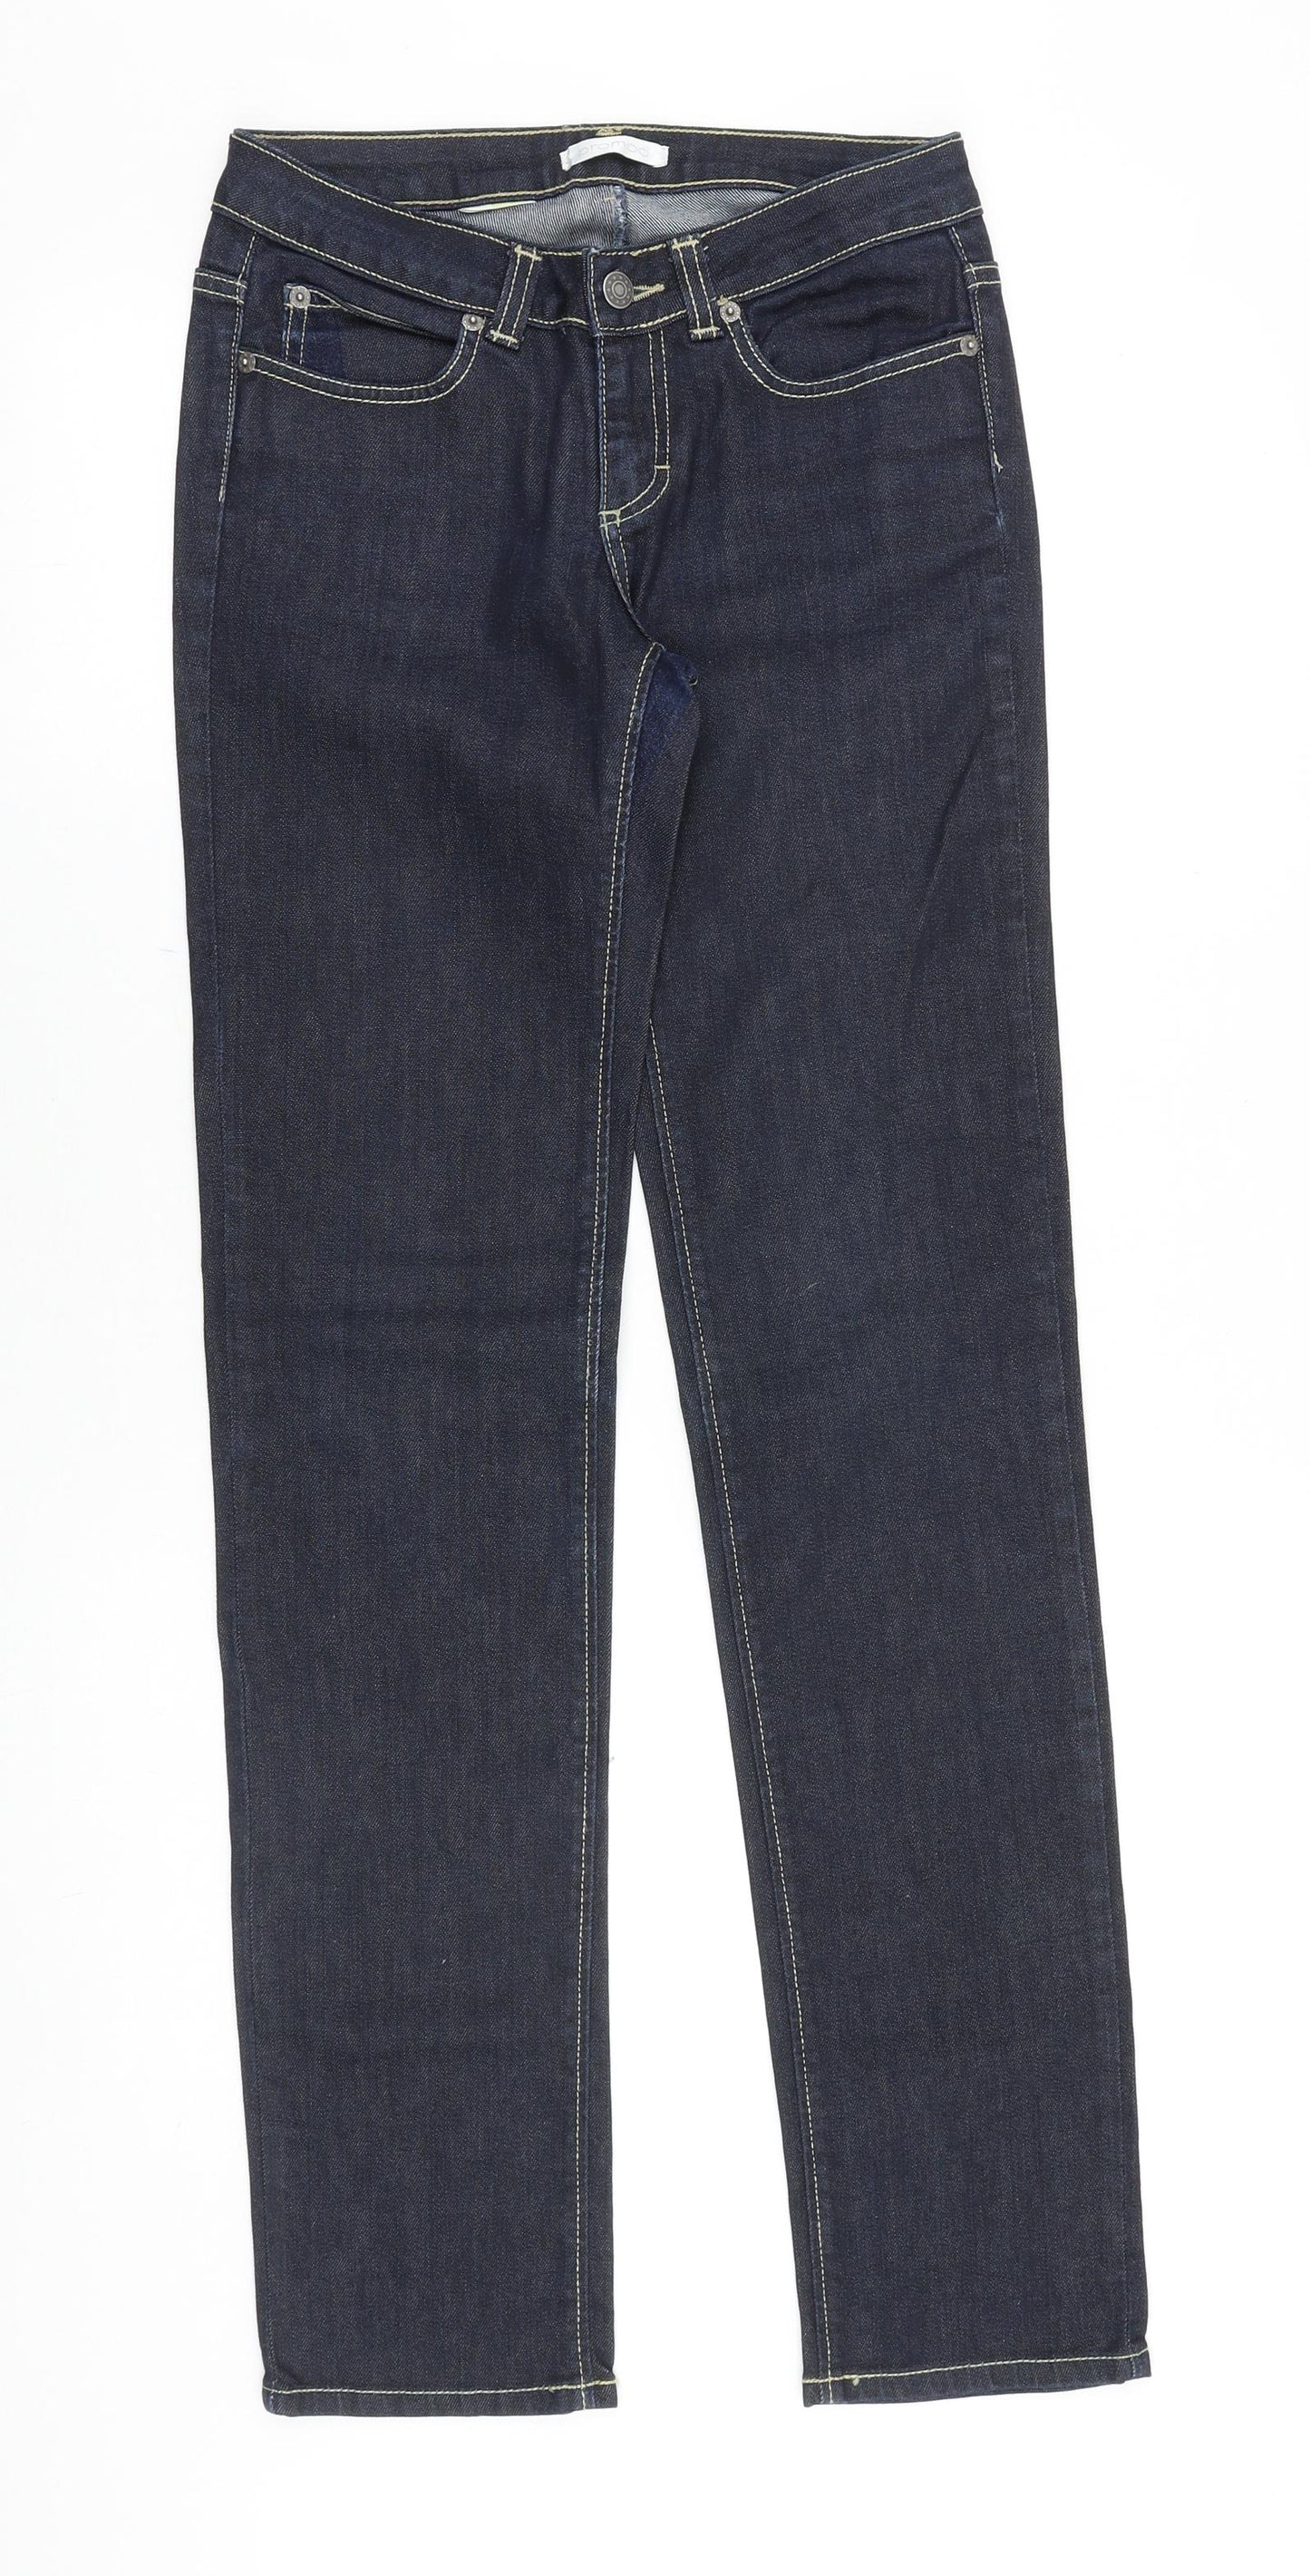 Promod Womens Blue Cotton Straight Jeans Size 28 in Regular Zip